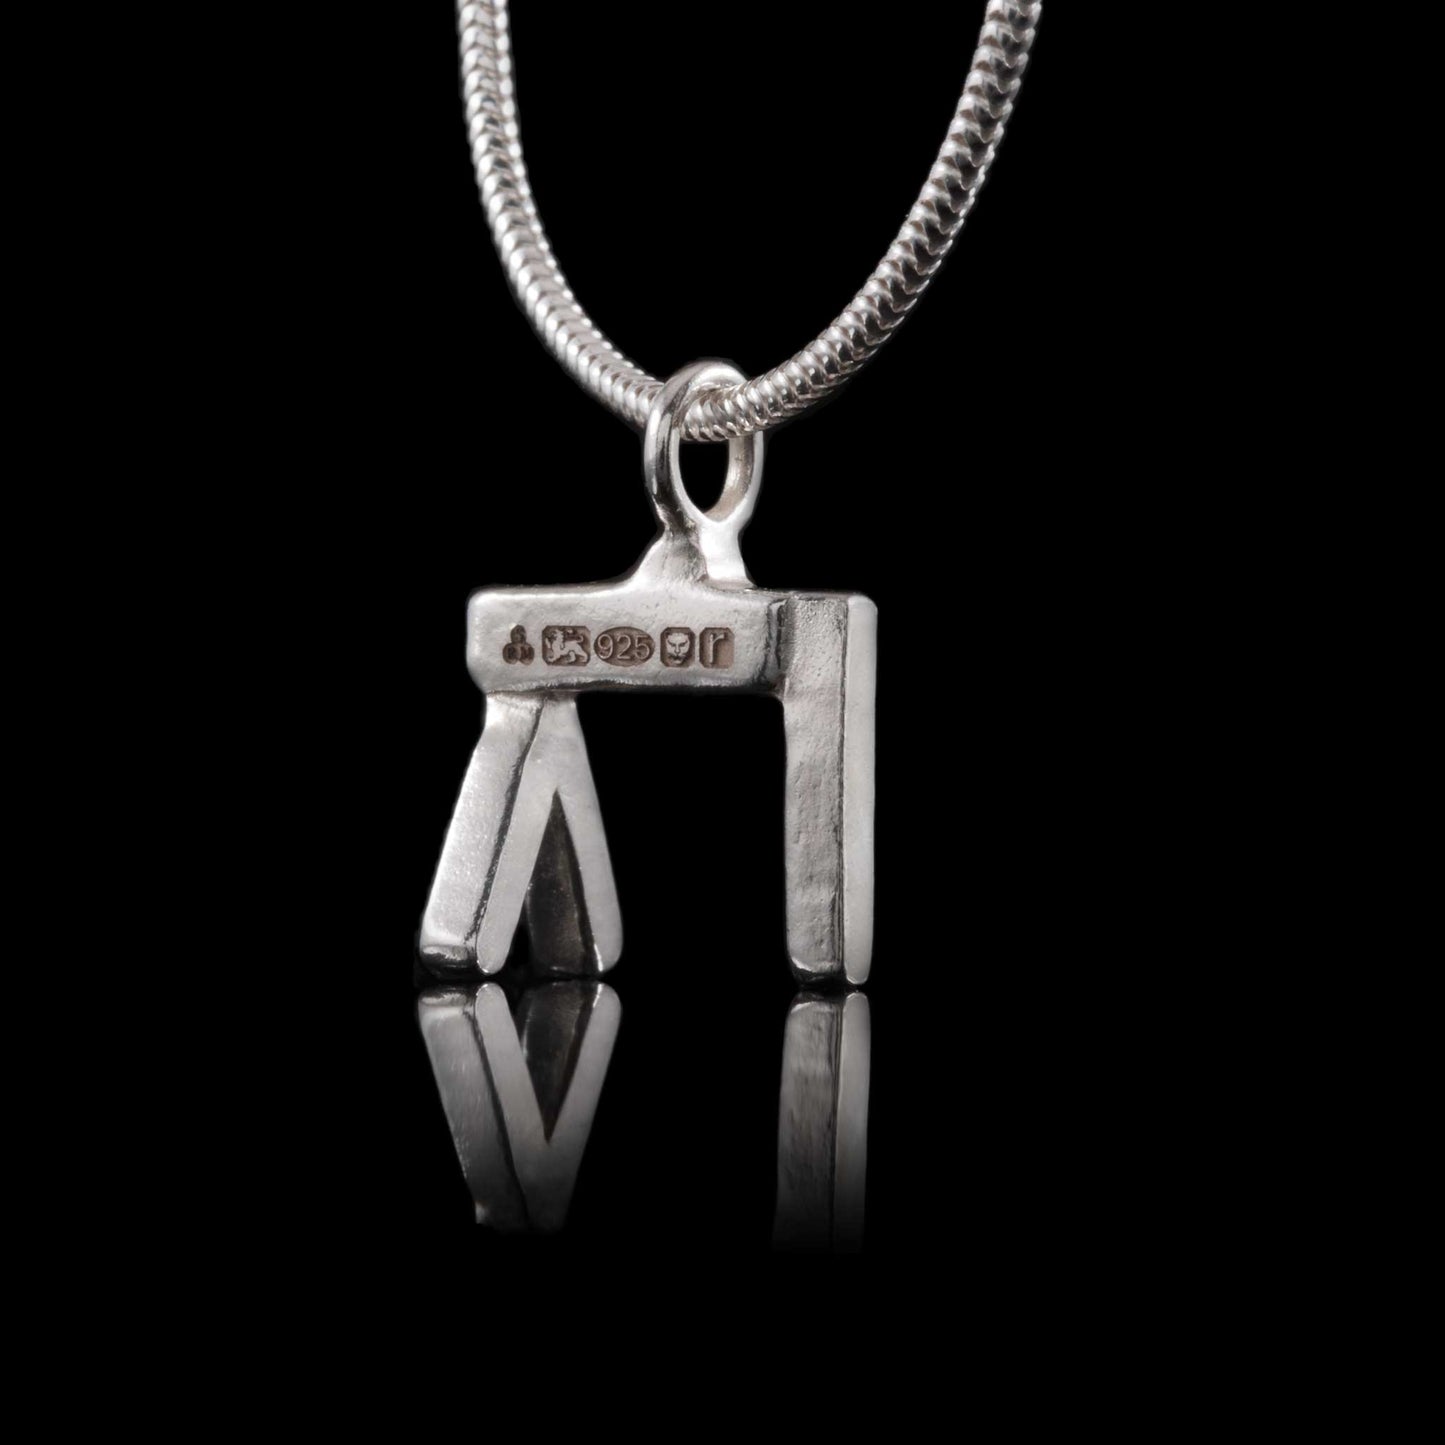 Handcrafted UK Made Sterling Silver Pendant. Belfast jewellery gift idea.  Engrave with your own personalized word up to 8 letters.  Hallmarked.